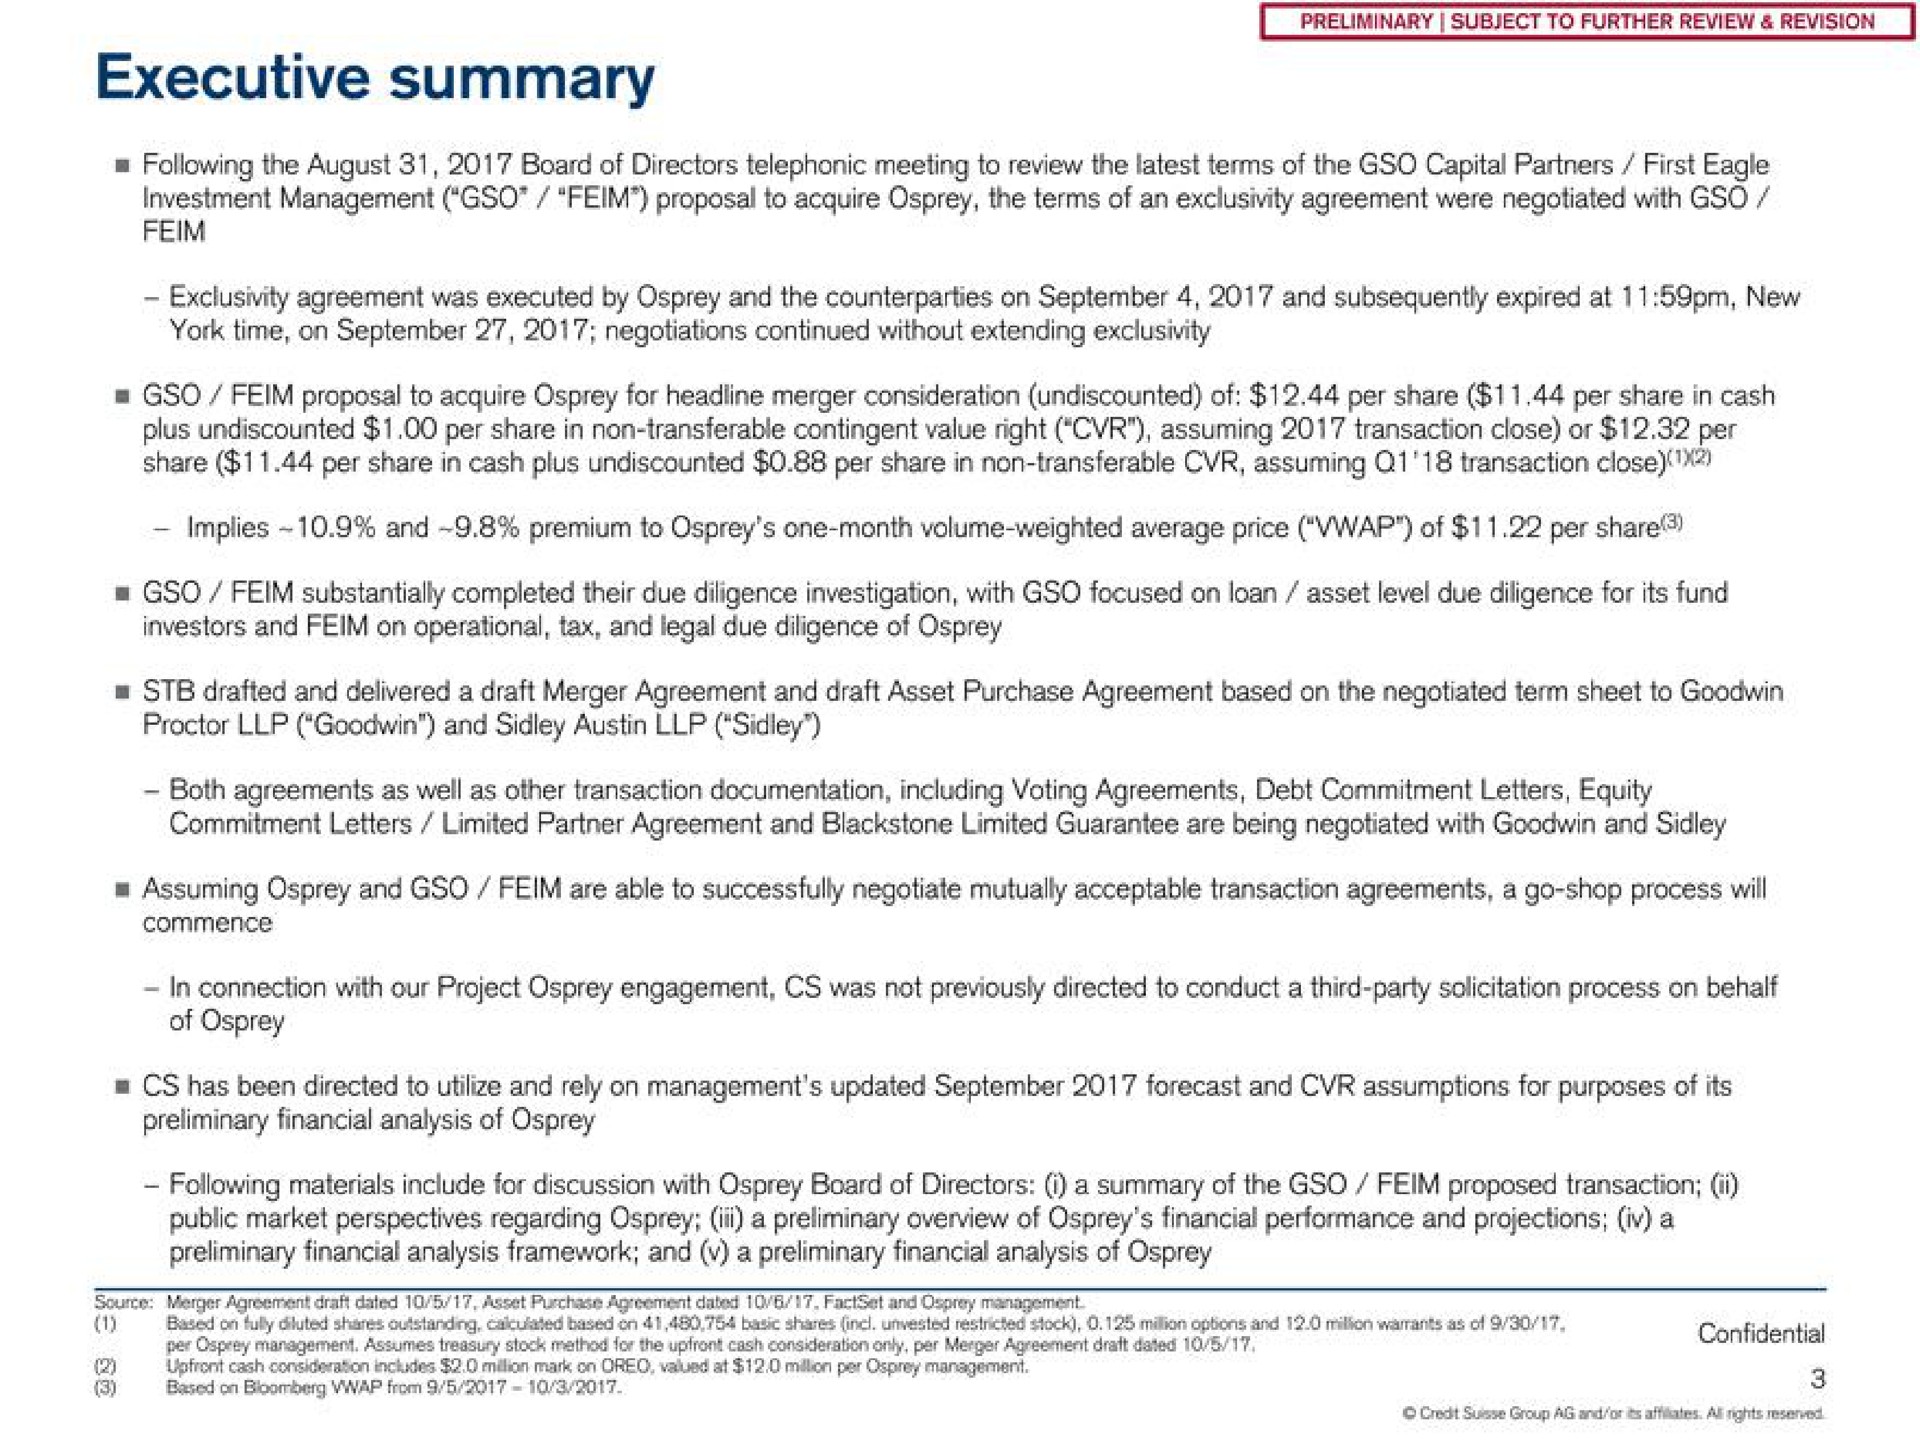 executive summary | Credit Suisse